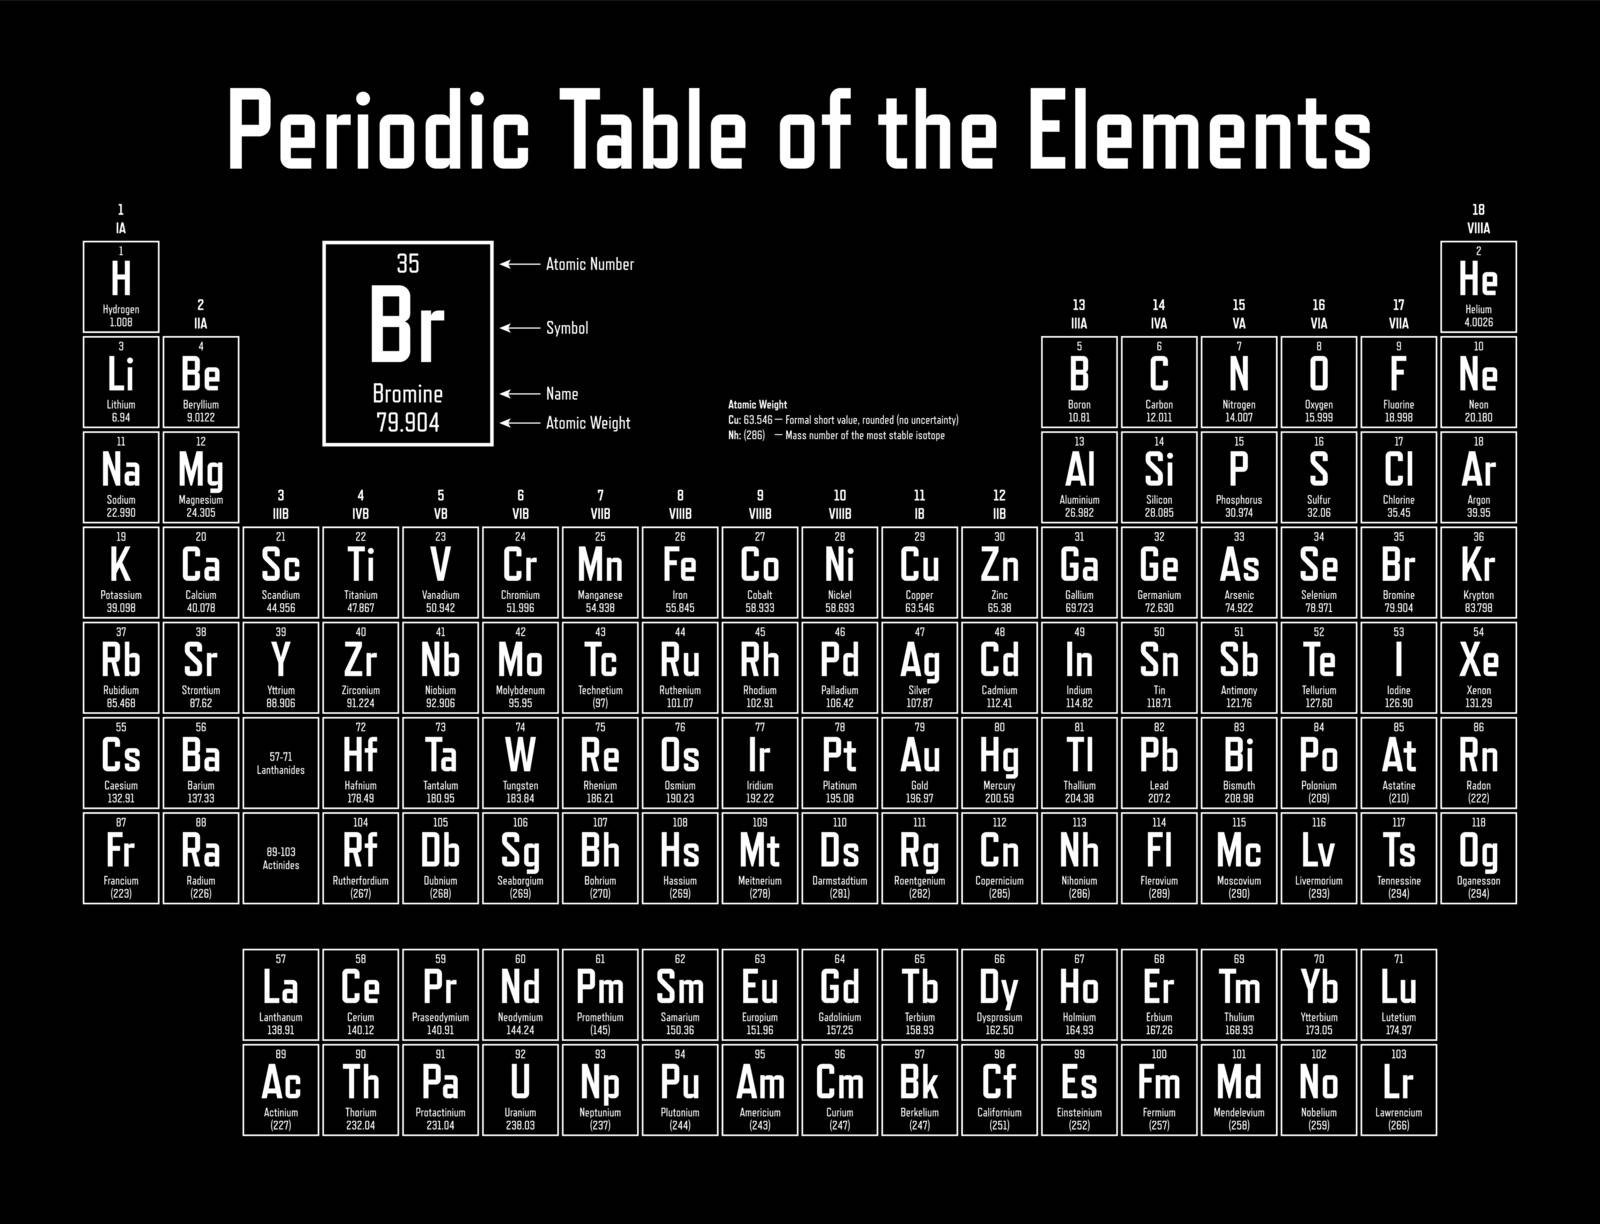 Periodic Table of the Elements - shows atomic number, symbol, name and atomic weight